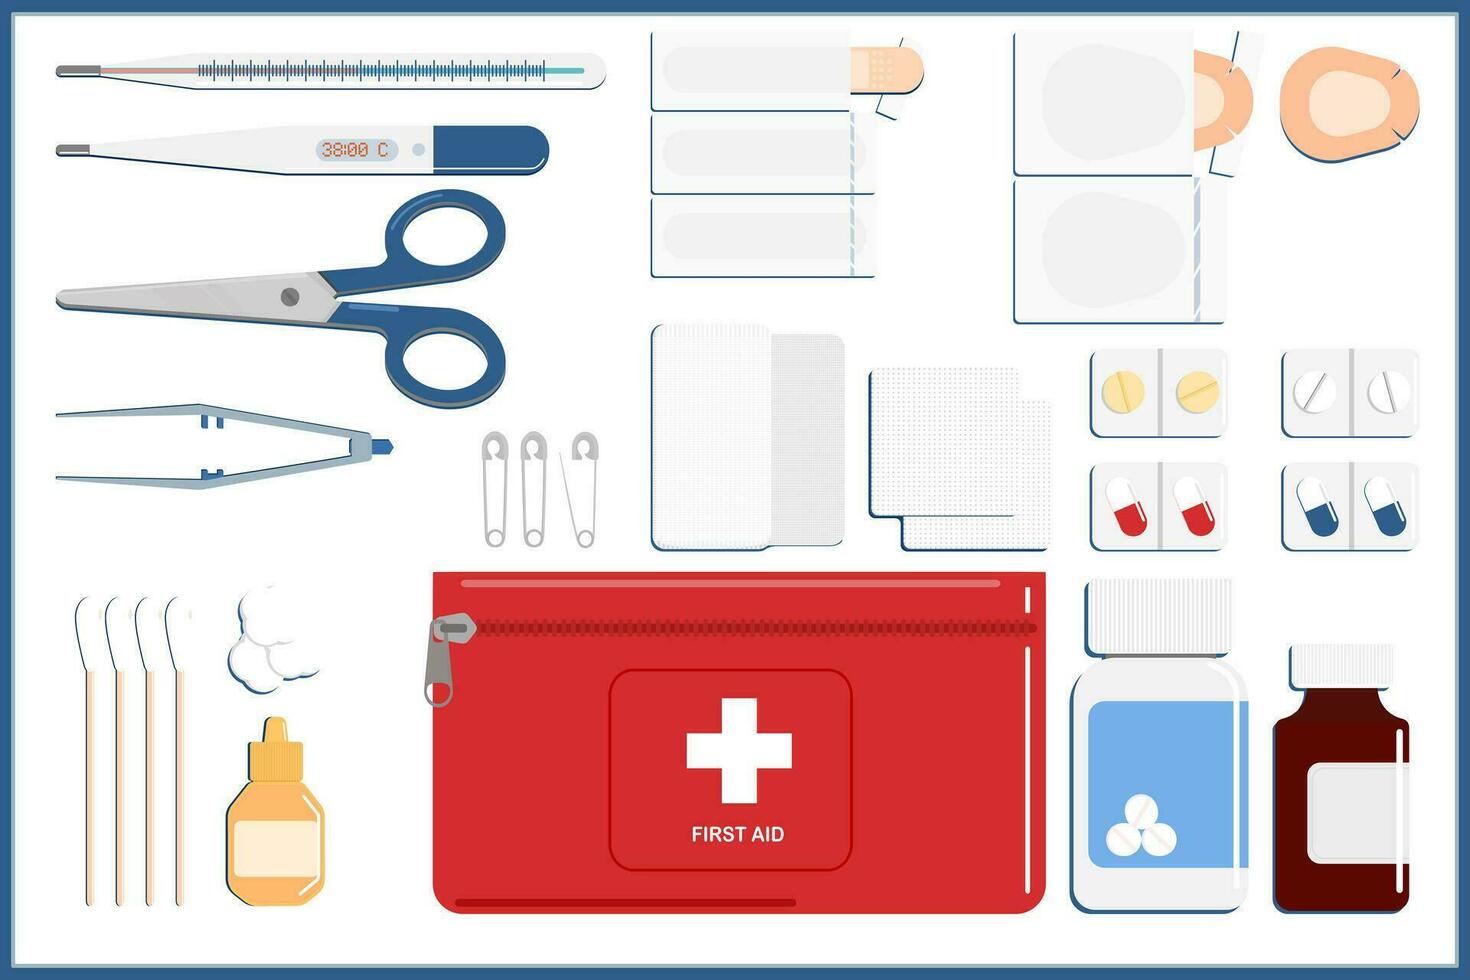 first aid kit for portable.red zip pouch,digital thermometer,cotton pad,tweezer,paracetamol bottle,saline solution,betadine wound cleanser,cotton swabs and bandages isolated on white background. vector